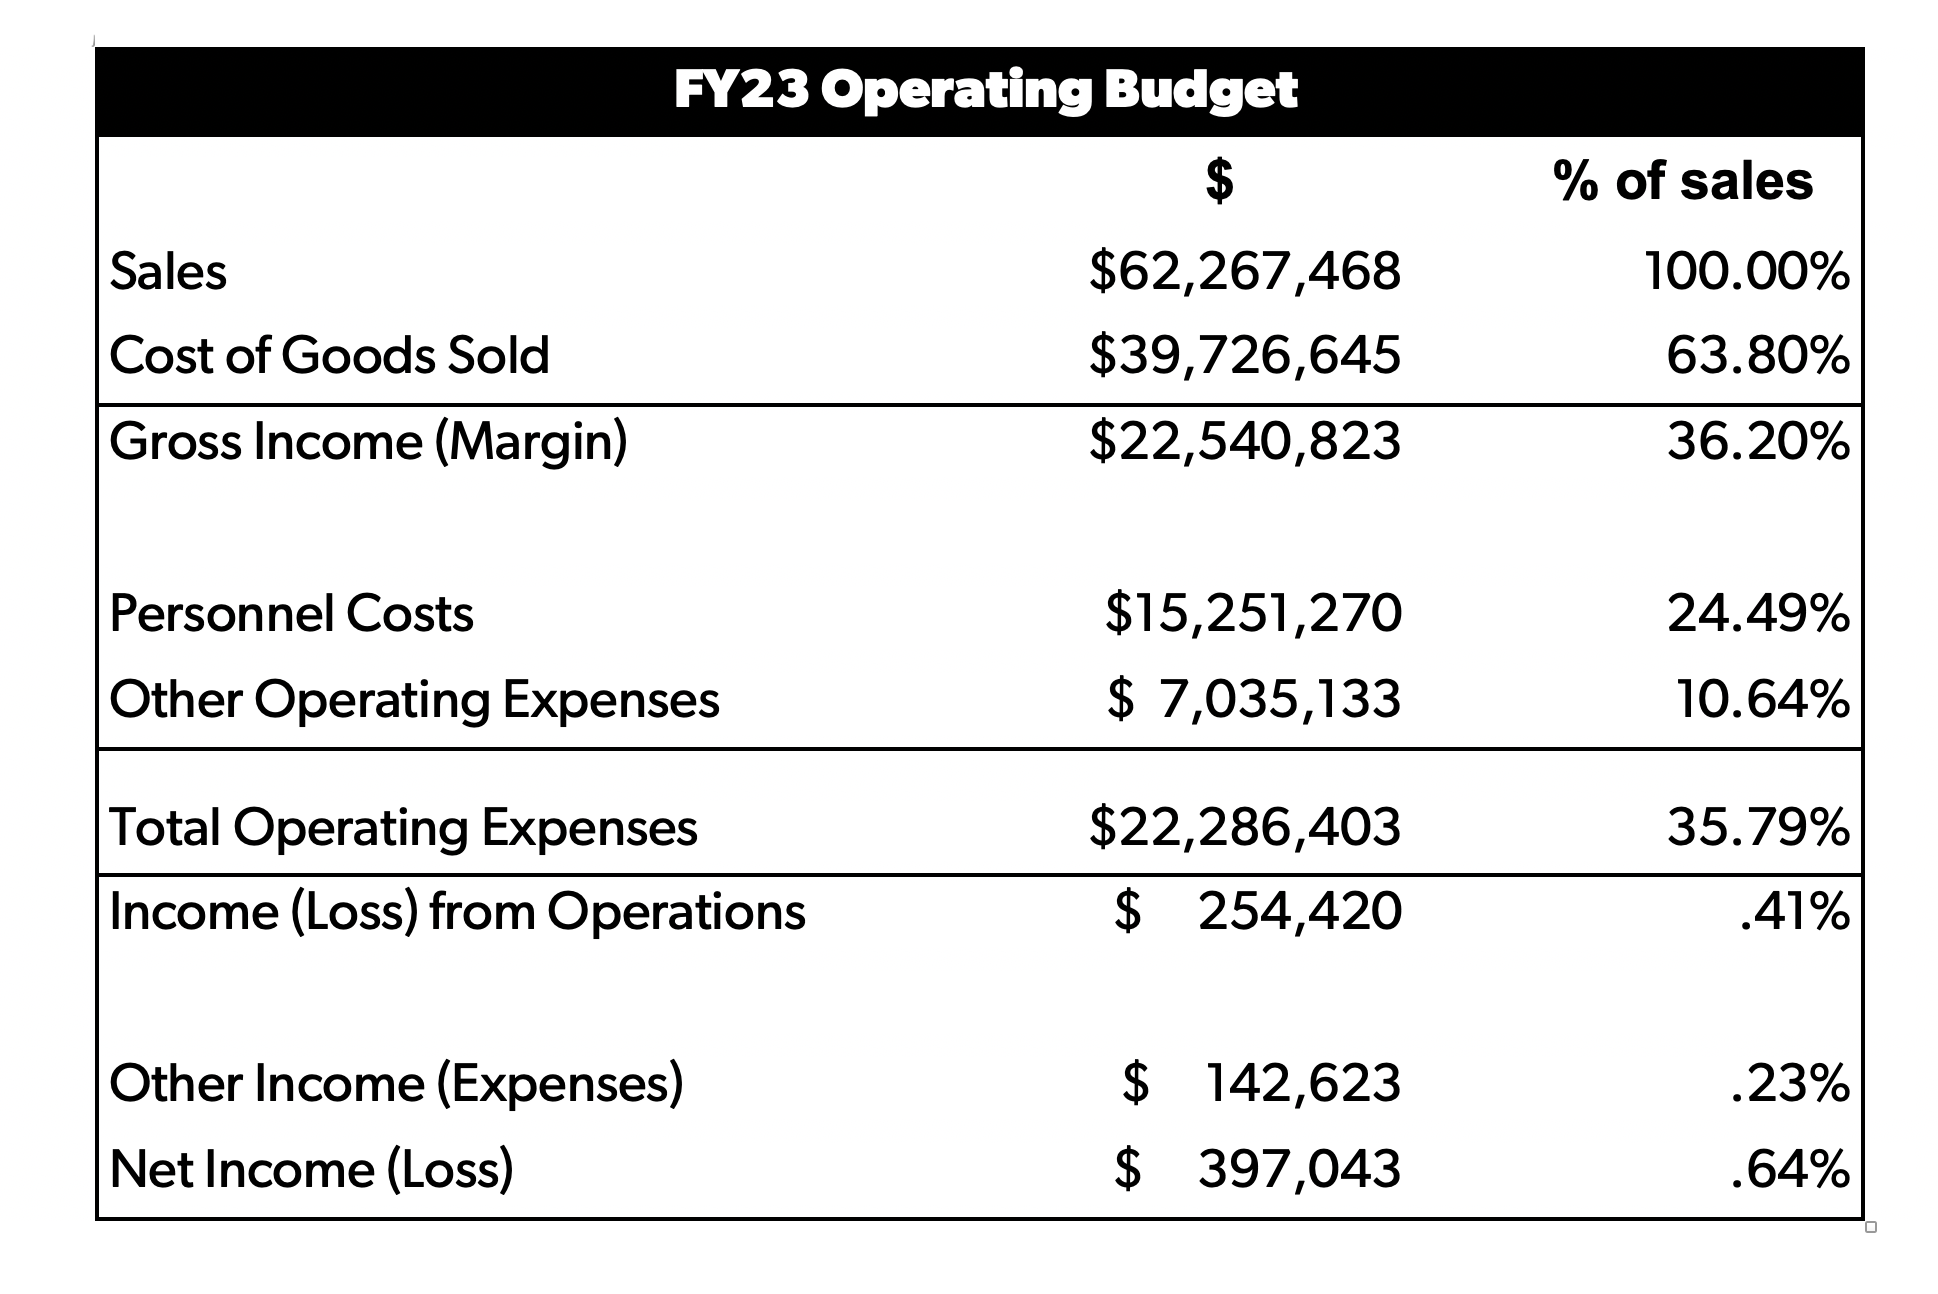 FY23 Operating Budget